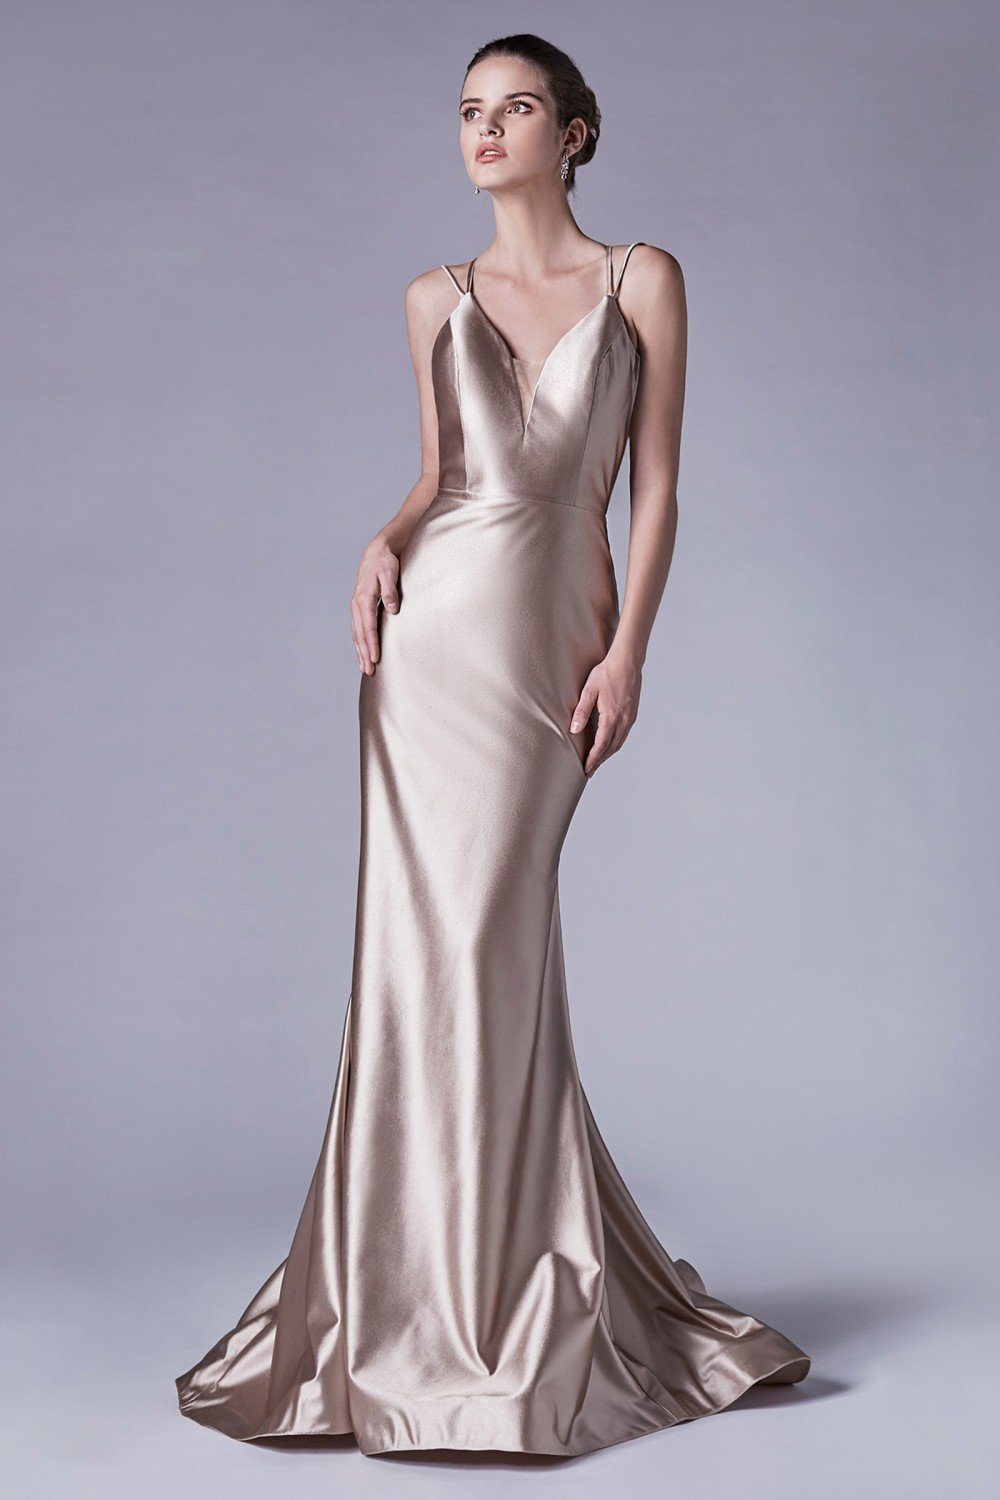 Andrea Leo Fitted Long Satin Mermaid Dress with Lace Up Back A0632